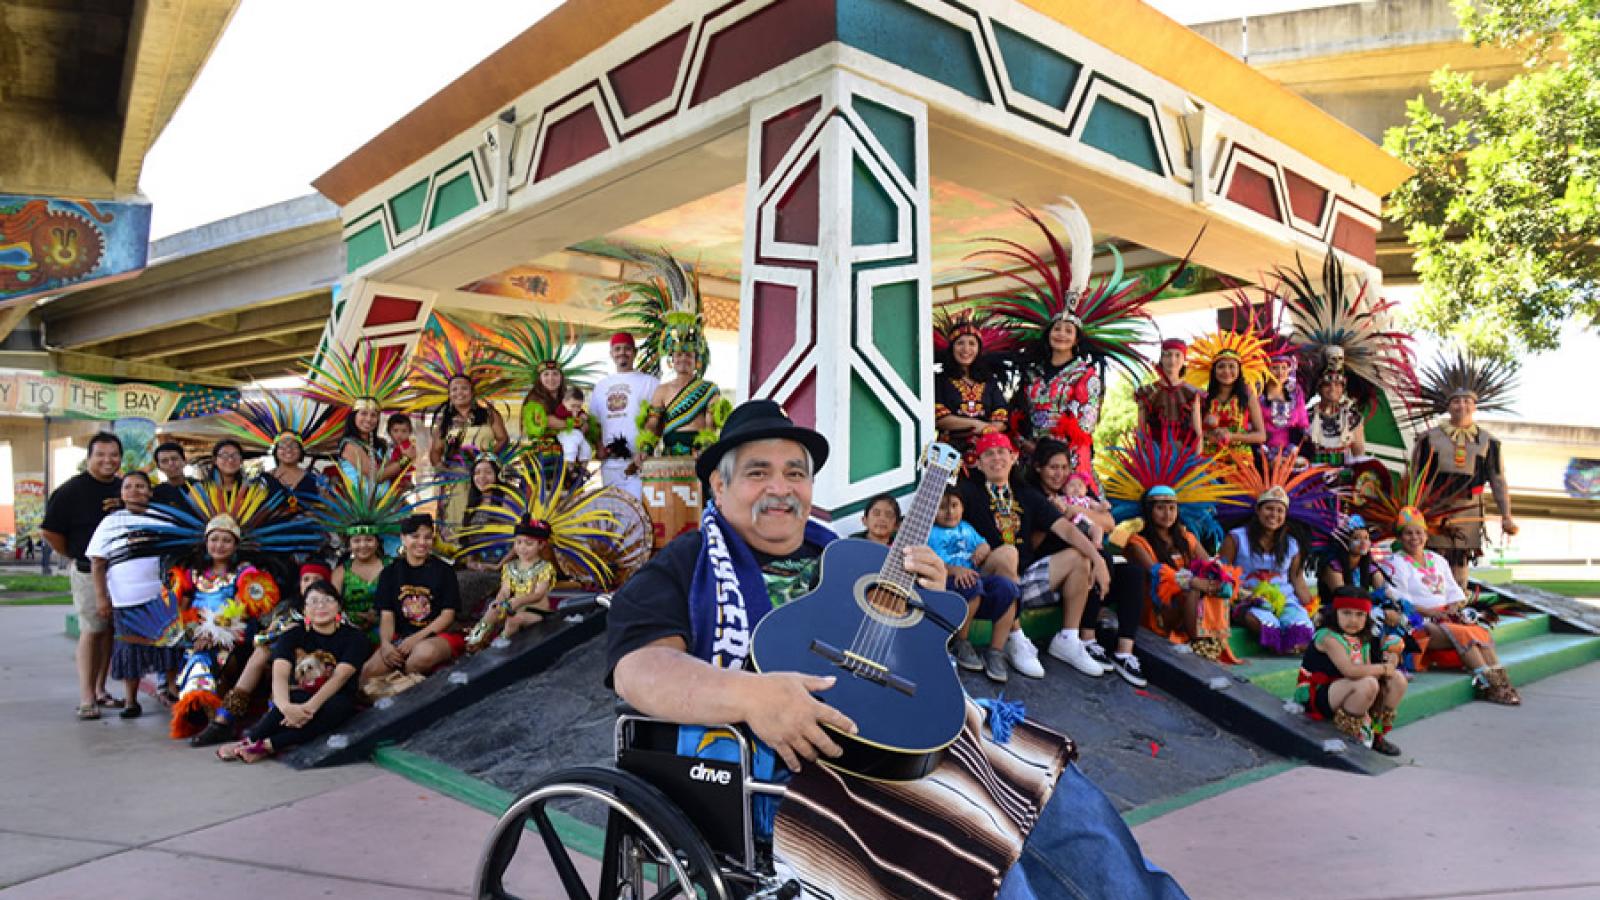 Ramón "Chunky" Sánchez sits in a wheelchair, holding a guitar and smiling, in front of a large group of communitiy members and performers wearing colorful and elaborate Aztec costumes.